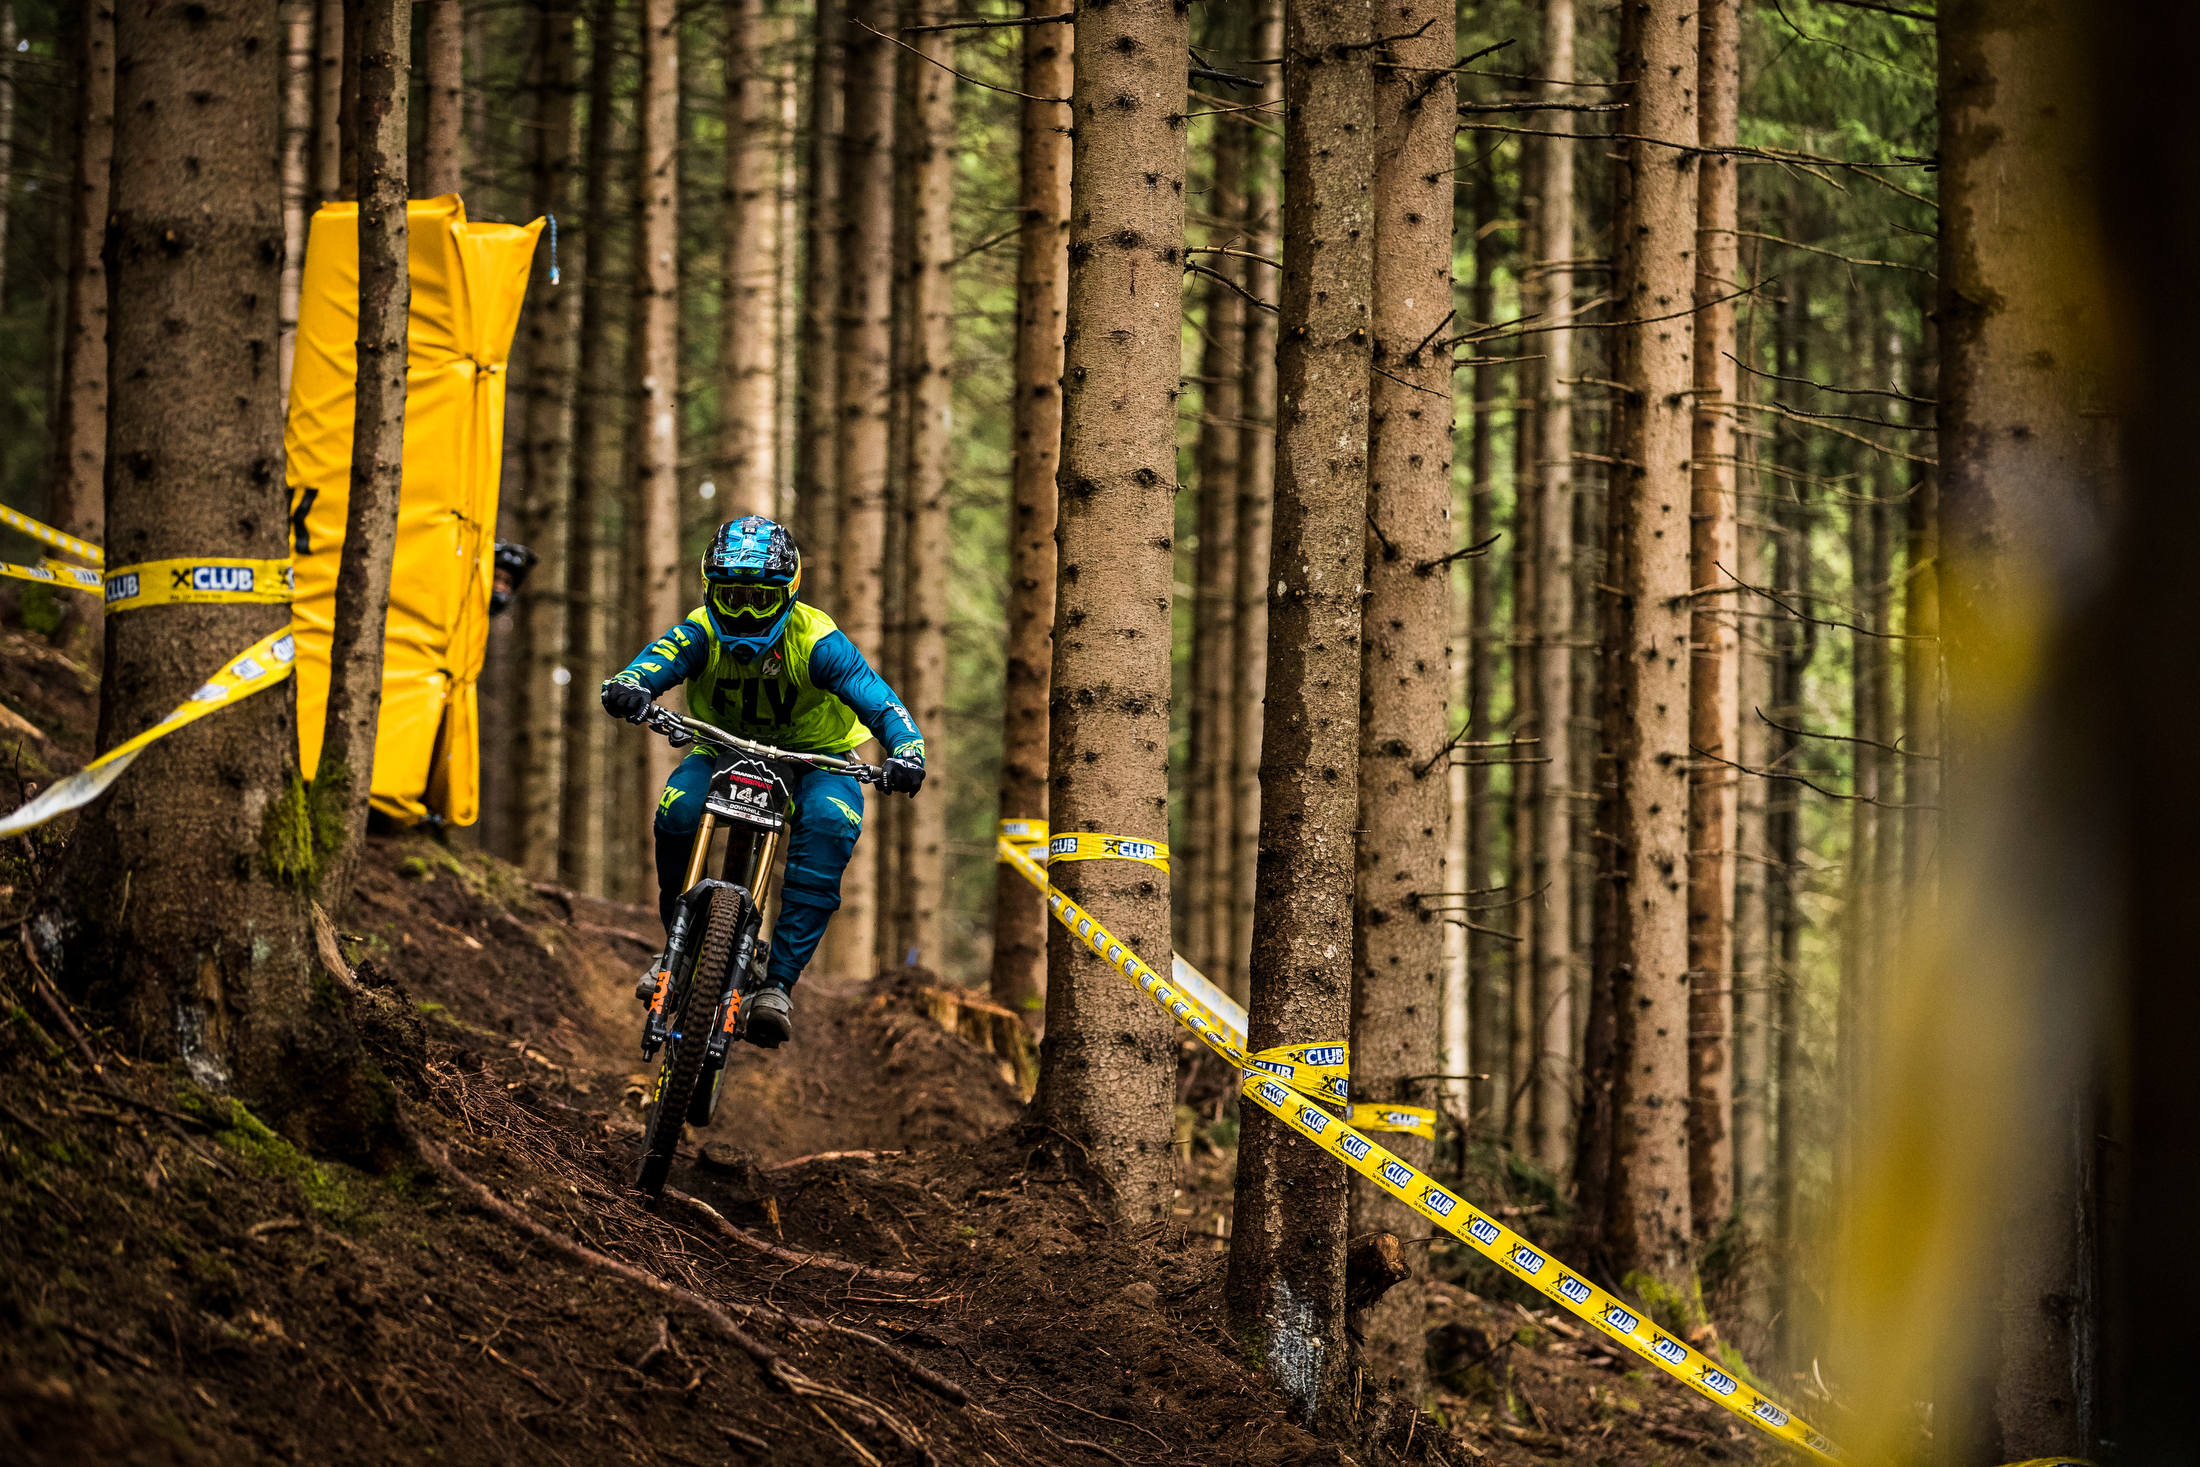 Ed Masters descends through the trees in the DH event. Crankworx Innsbruck 2019.